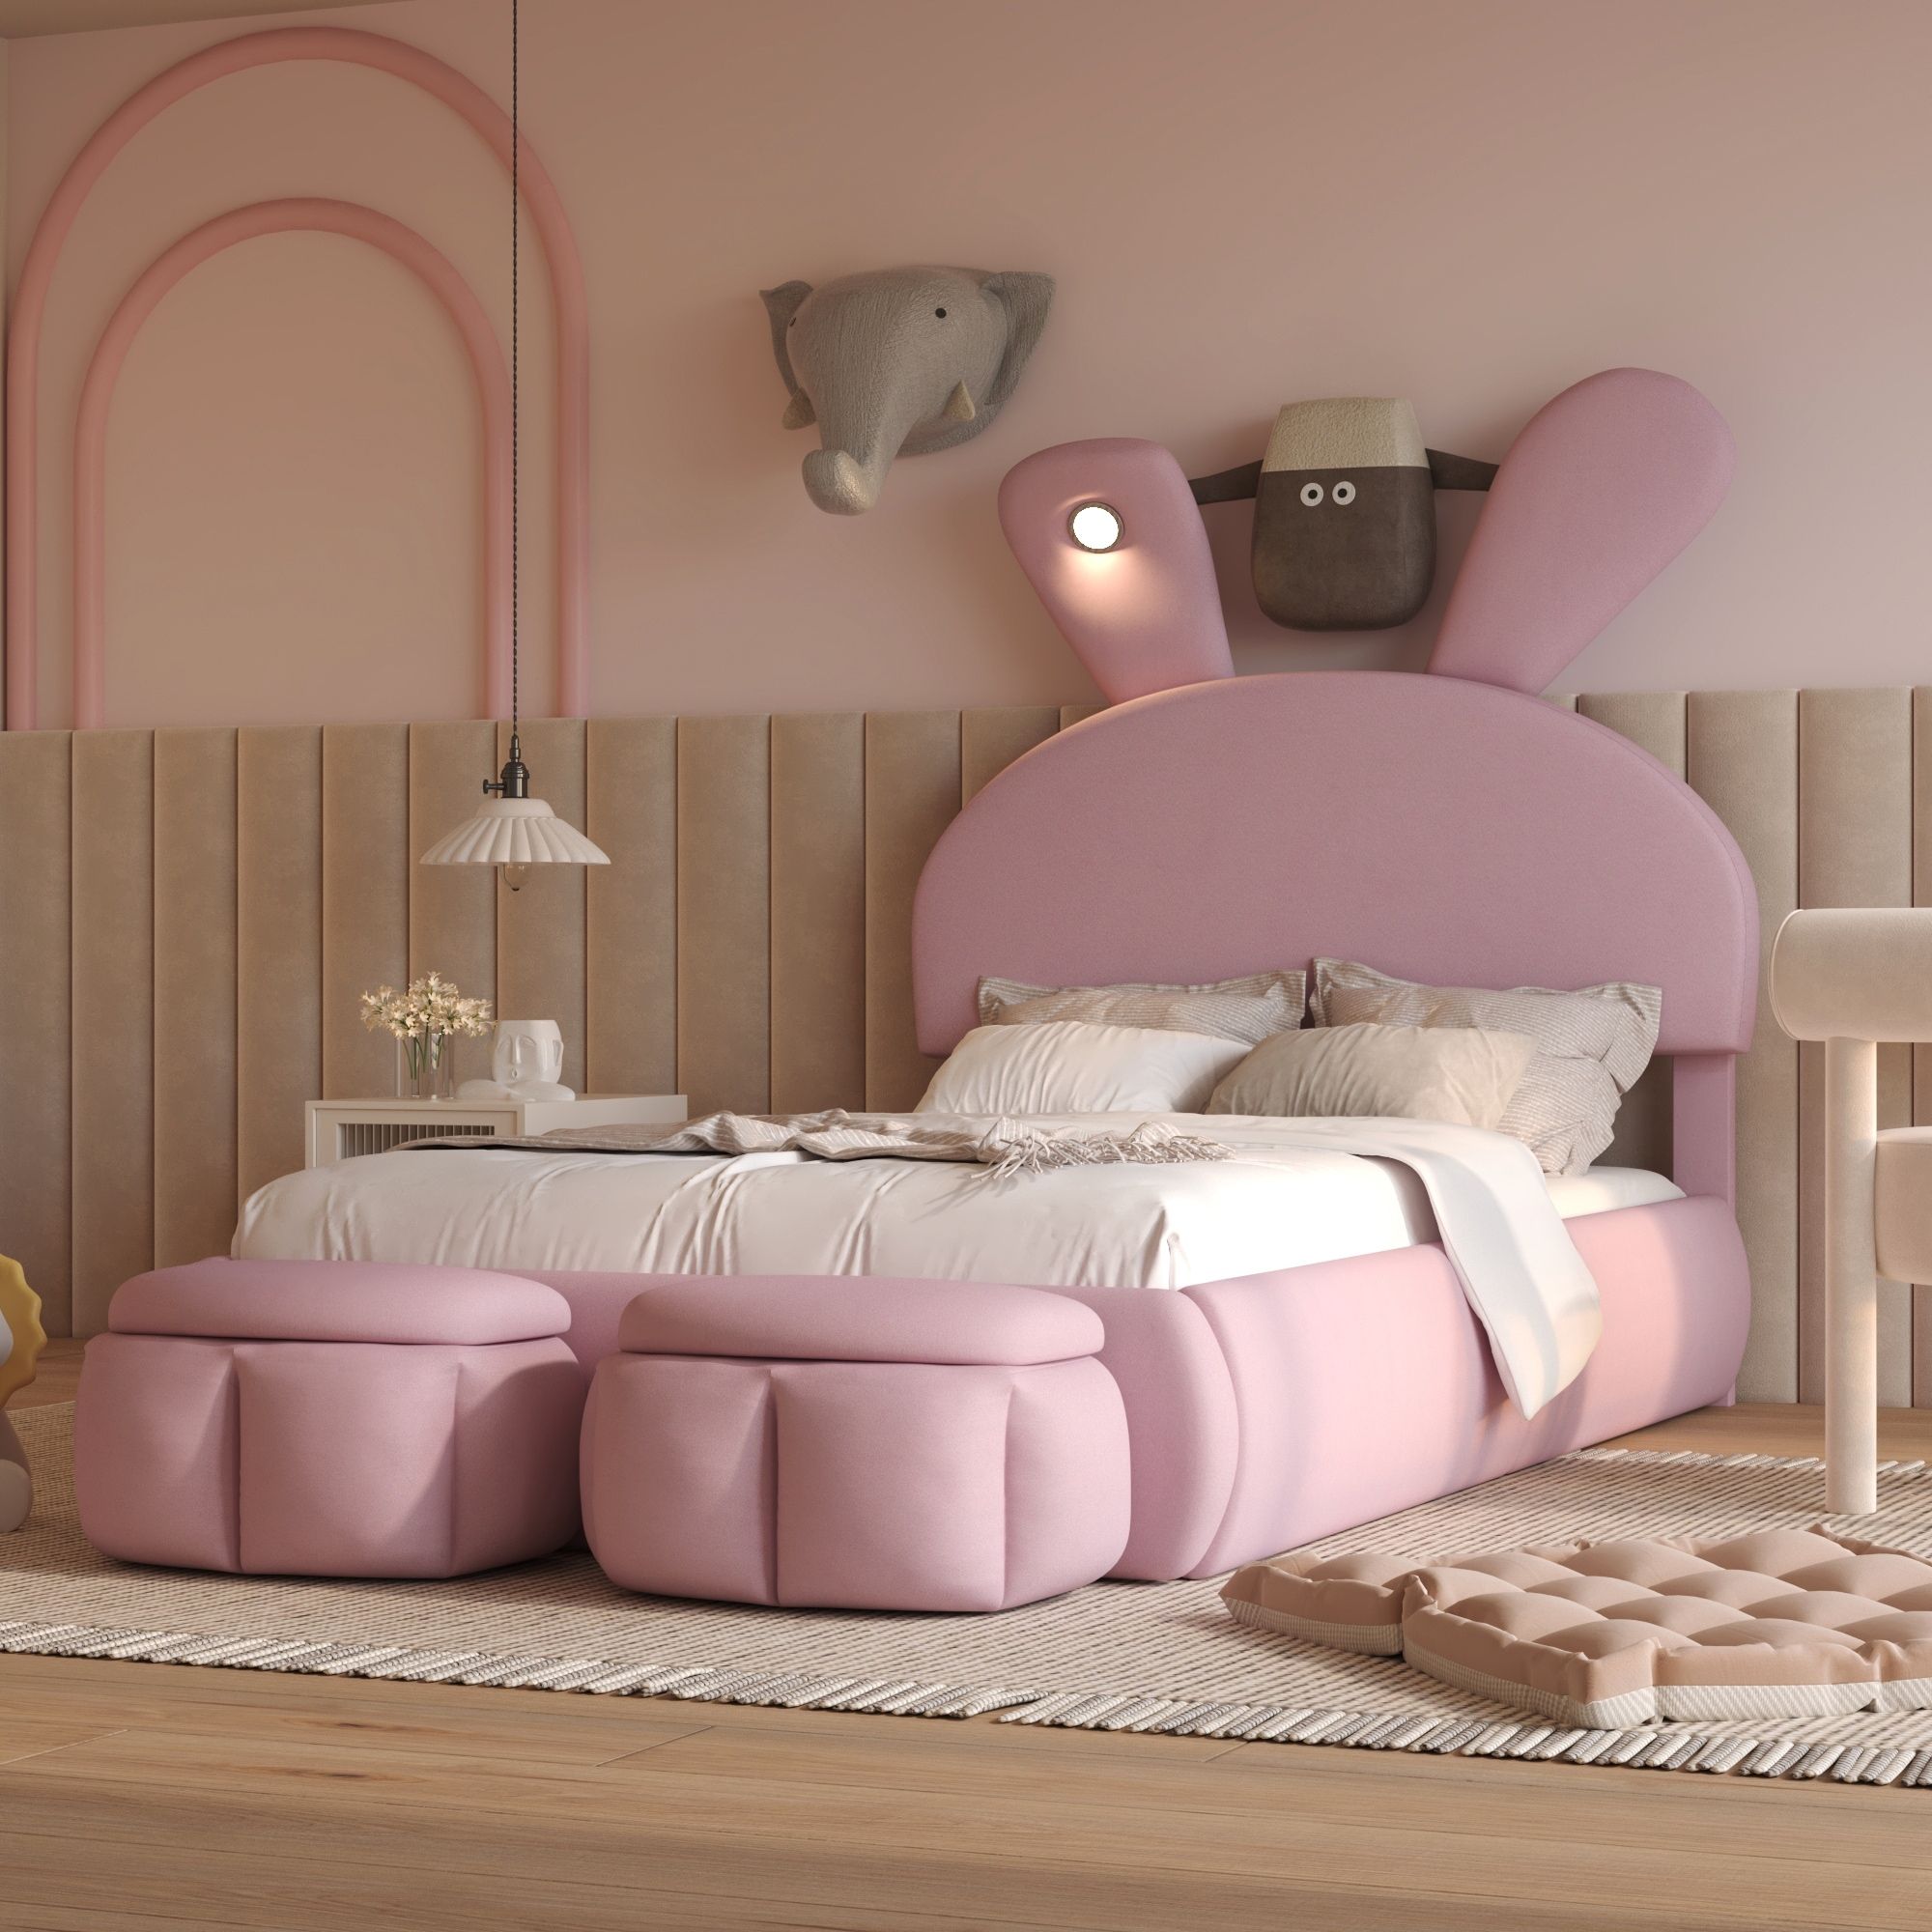 Play Beds For Kids Room Transform Your Child’s Bedroom with Fun and Functional Bed Designs